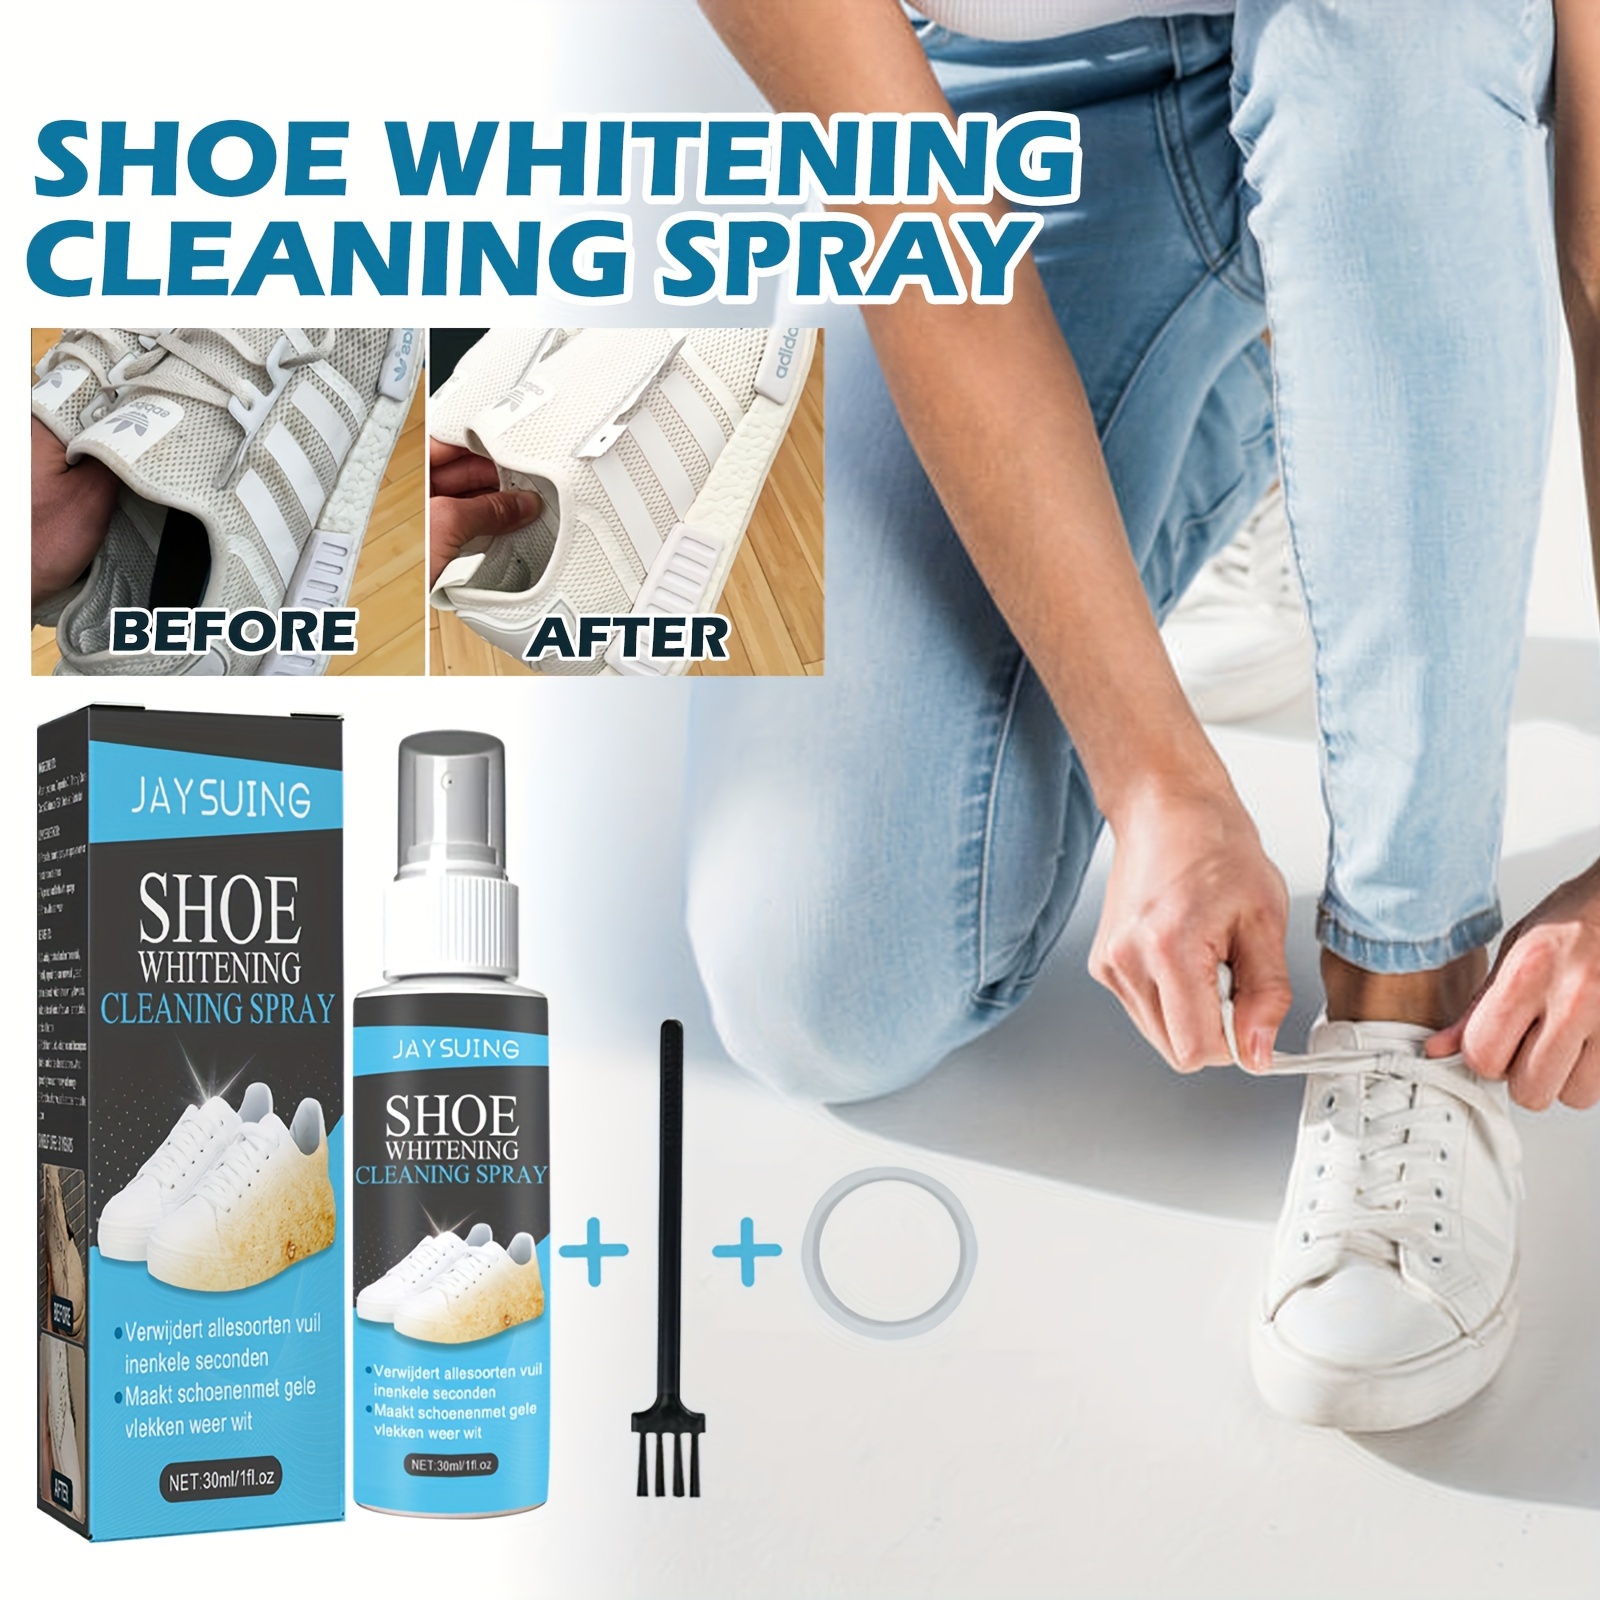 1/2/3pcs, Shoe Cleaning Cream, Shoe Cleaner, Leather Shoes Brightening